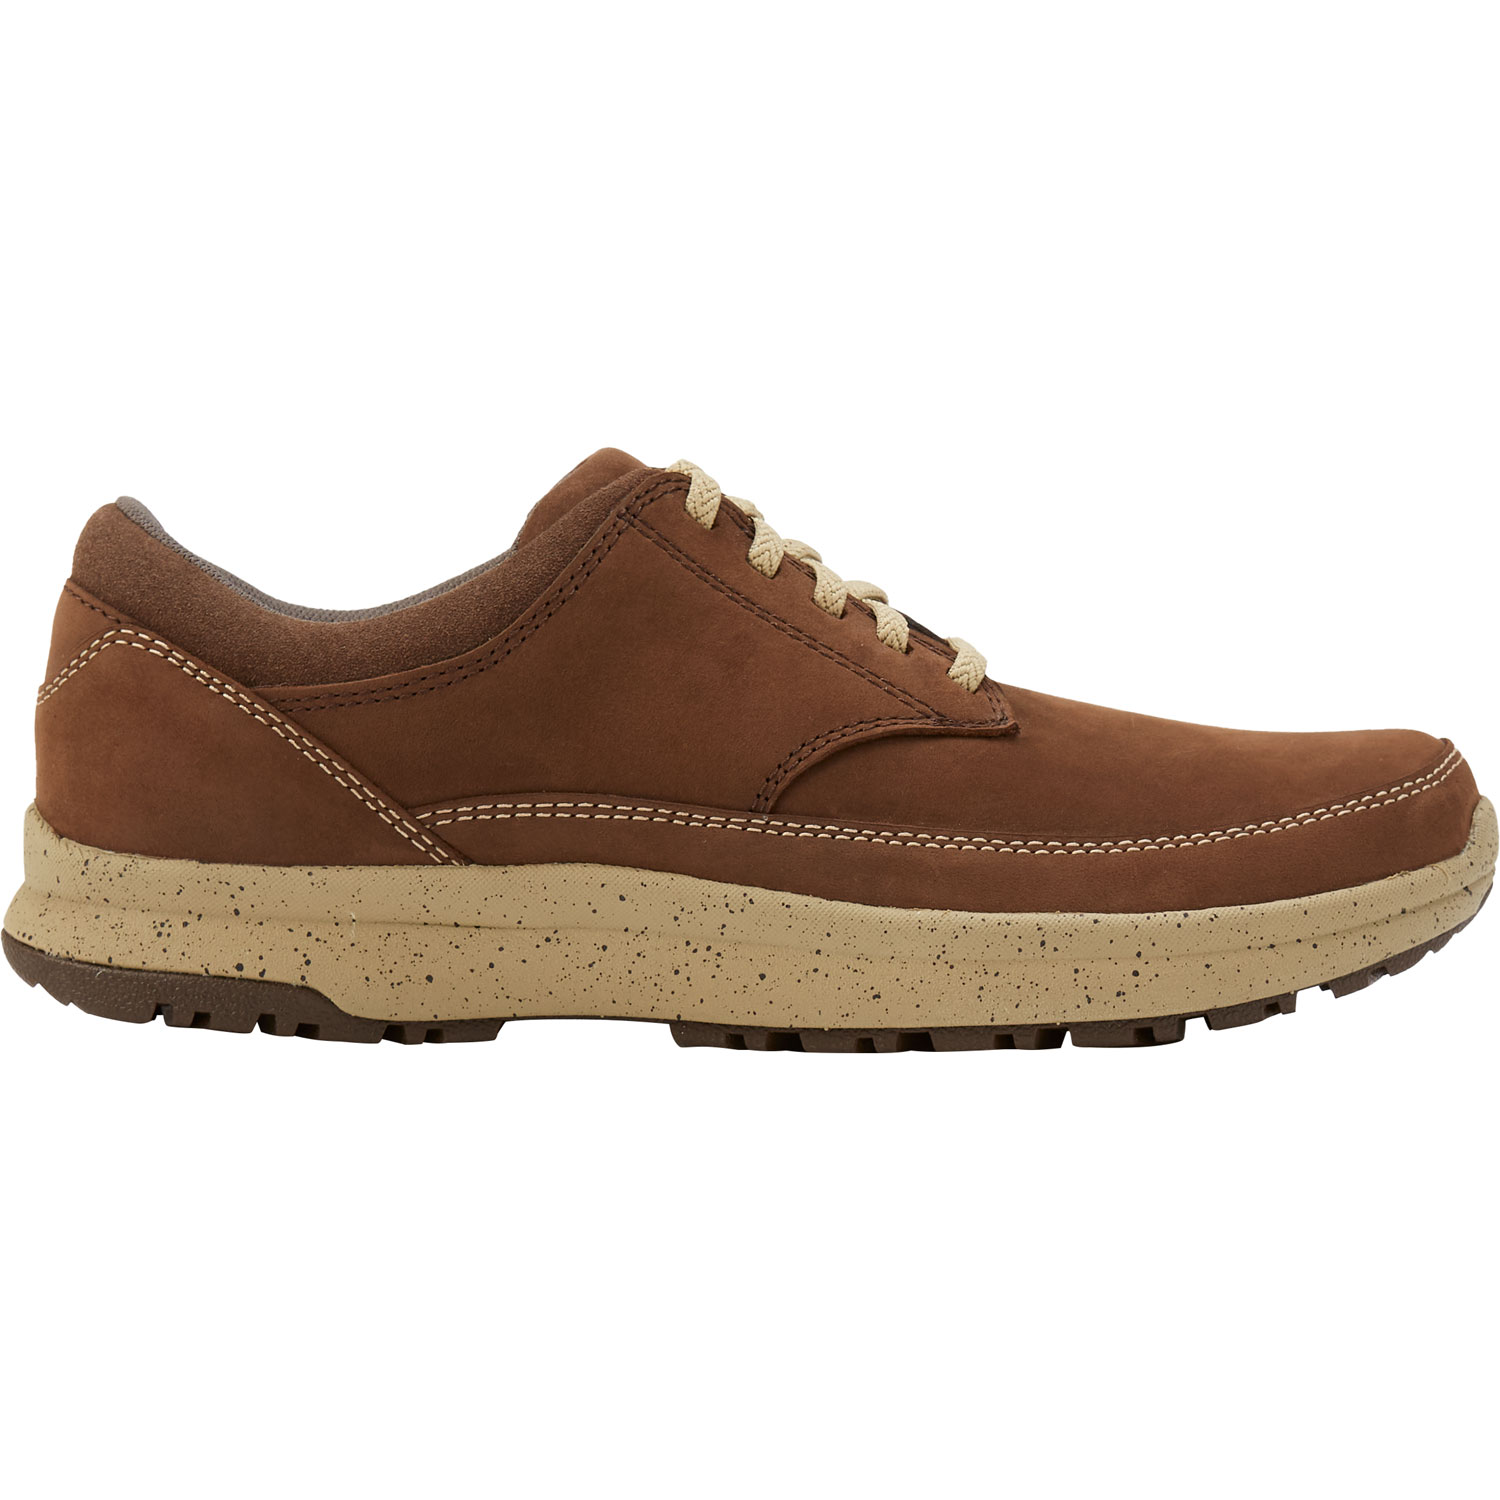 Men's Wild Boar Casual Lace-Up Shoes | Duluth Trading Company